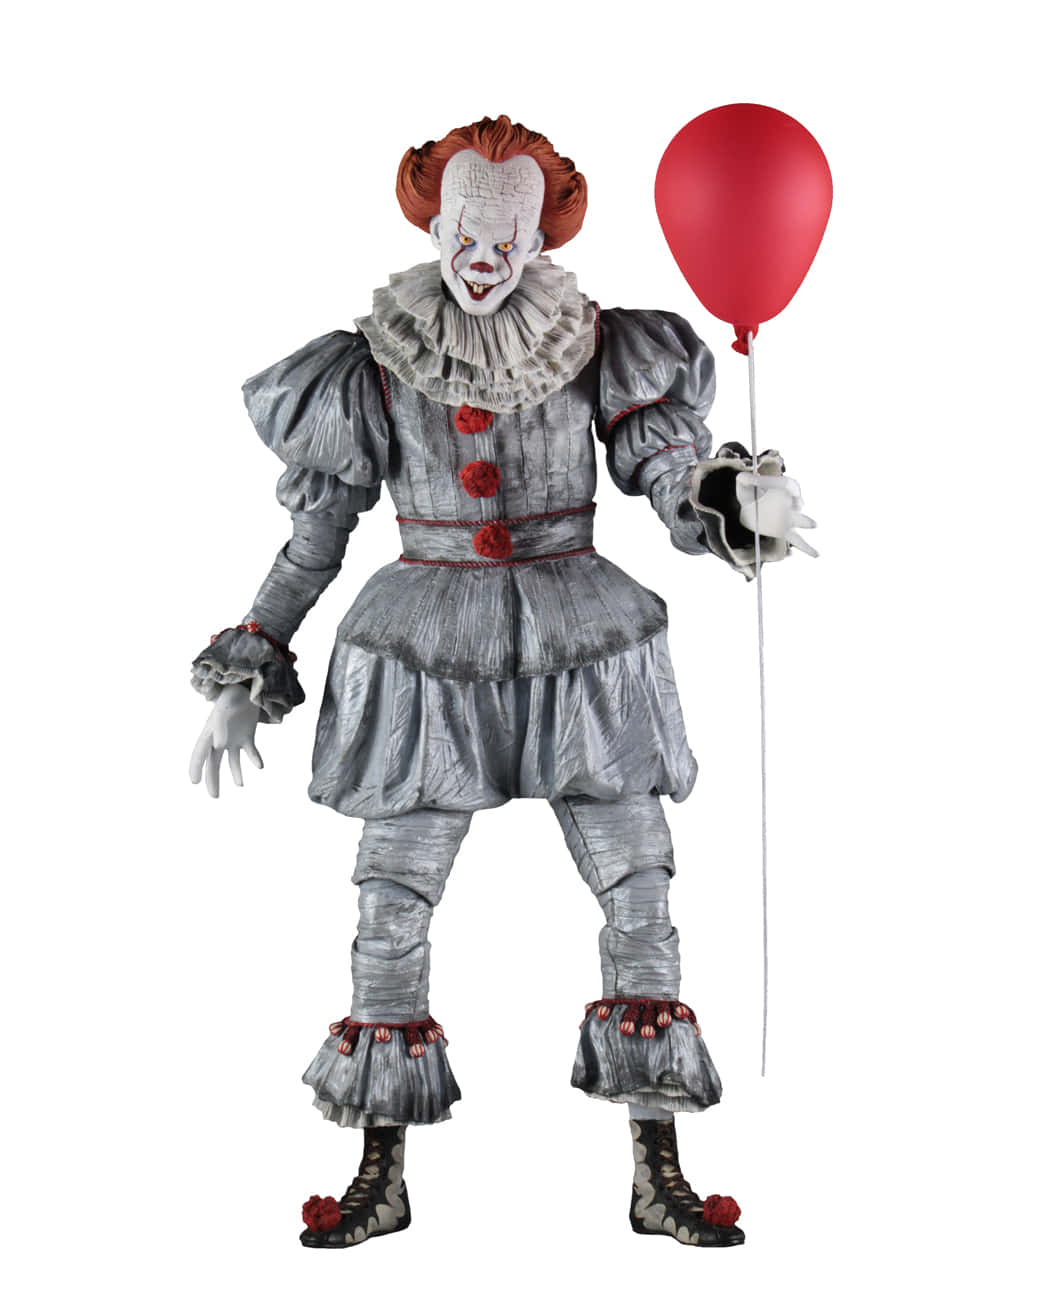 Unleash the fear of Pennywise